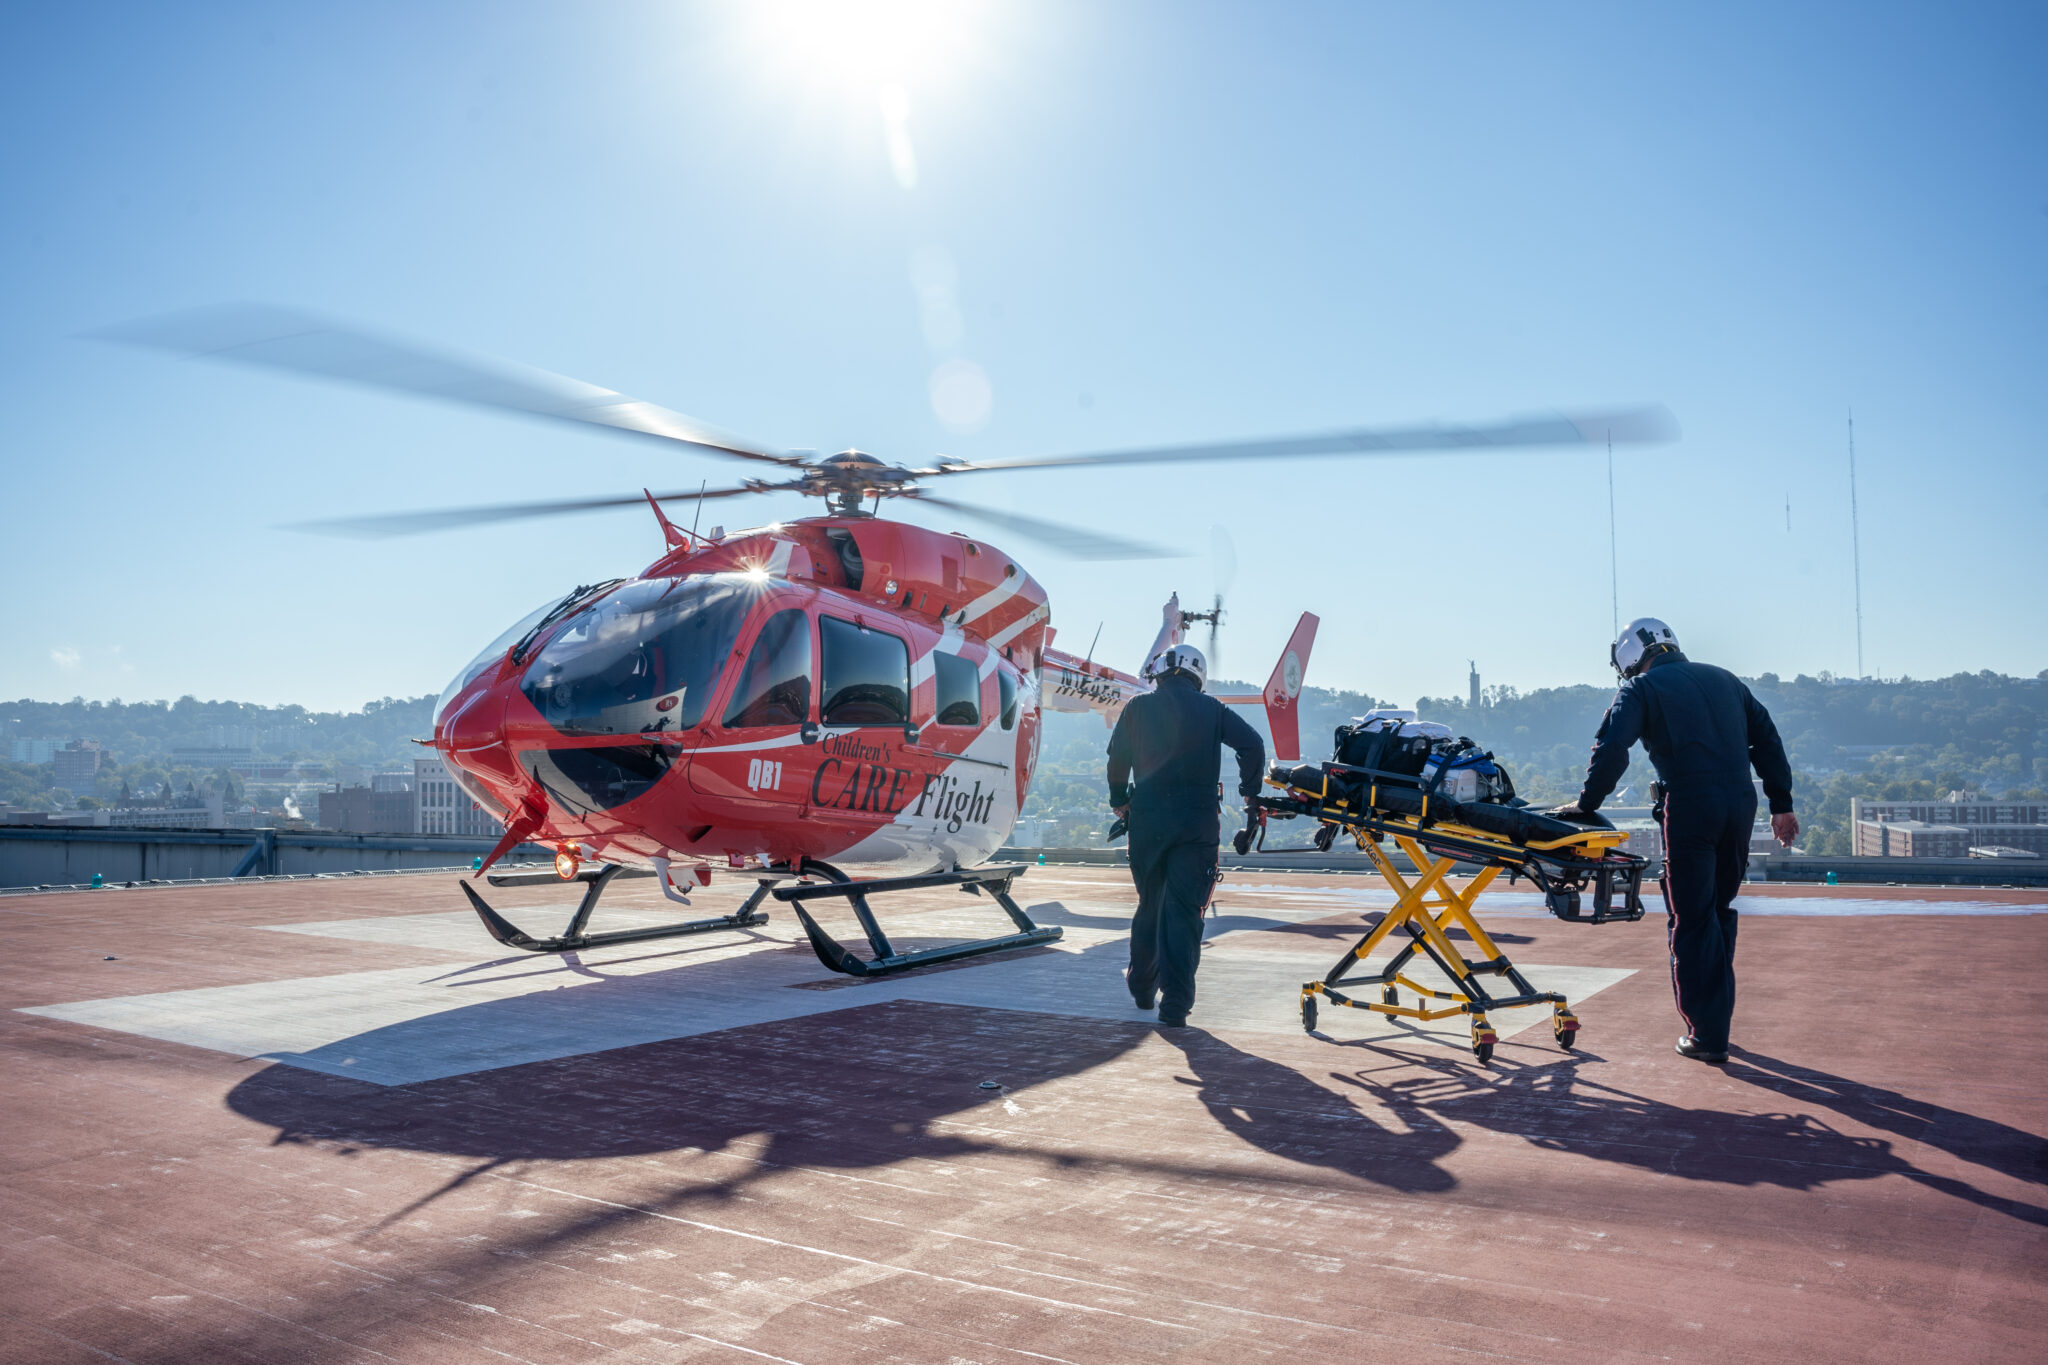 An inside look at the NEW Children’s of Alabama critical care helicopter